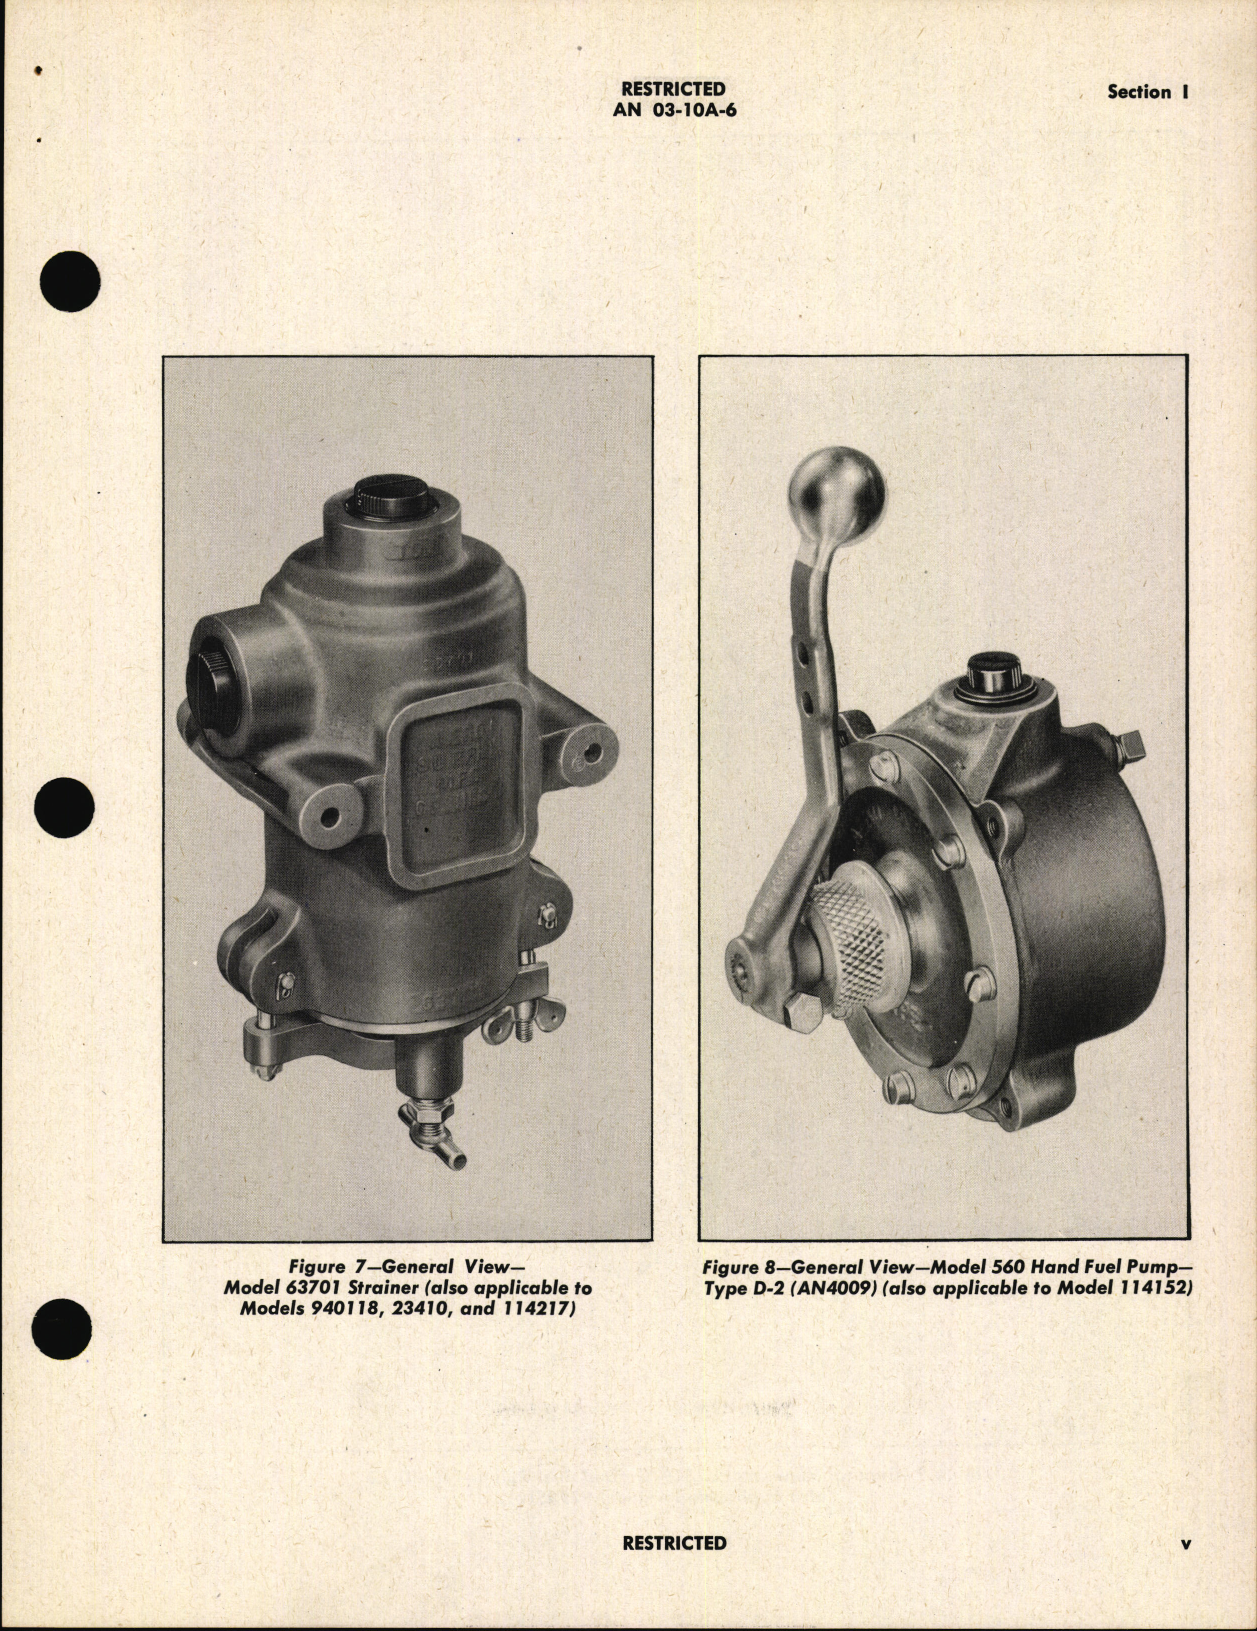 Sample page 7 from AirCorps Library document: Handbook of Instructions with Parts Catalog for Fuel System Units, Hand Fuel Pumps, Fuel System Strainers, and Relief Valves